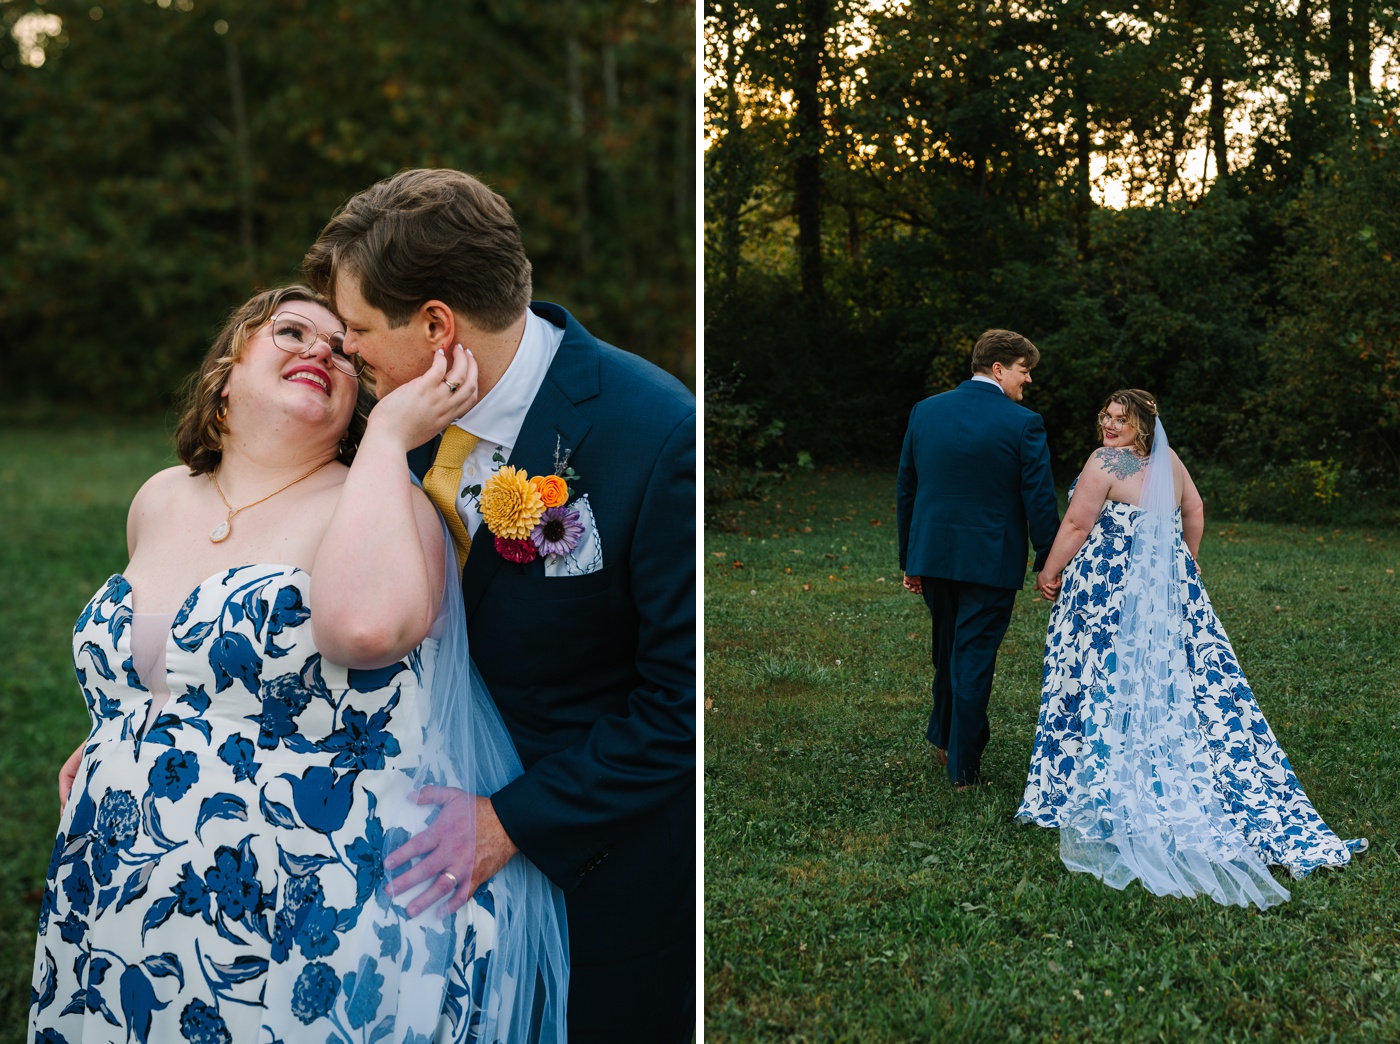 Bridal portraits at the Woolery Mill